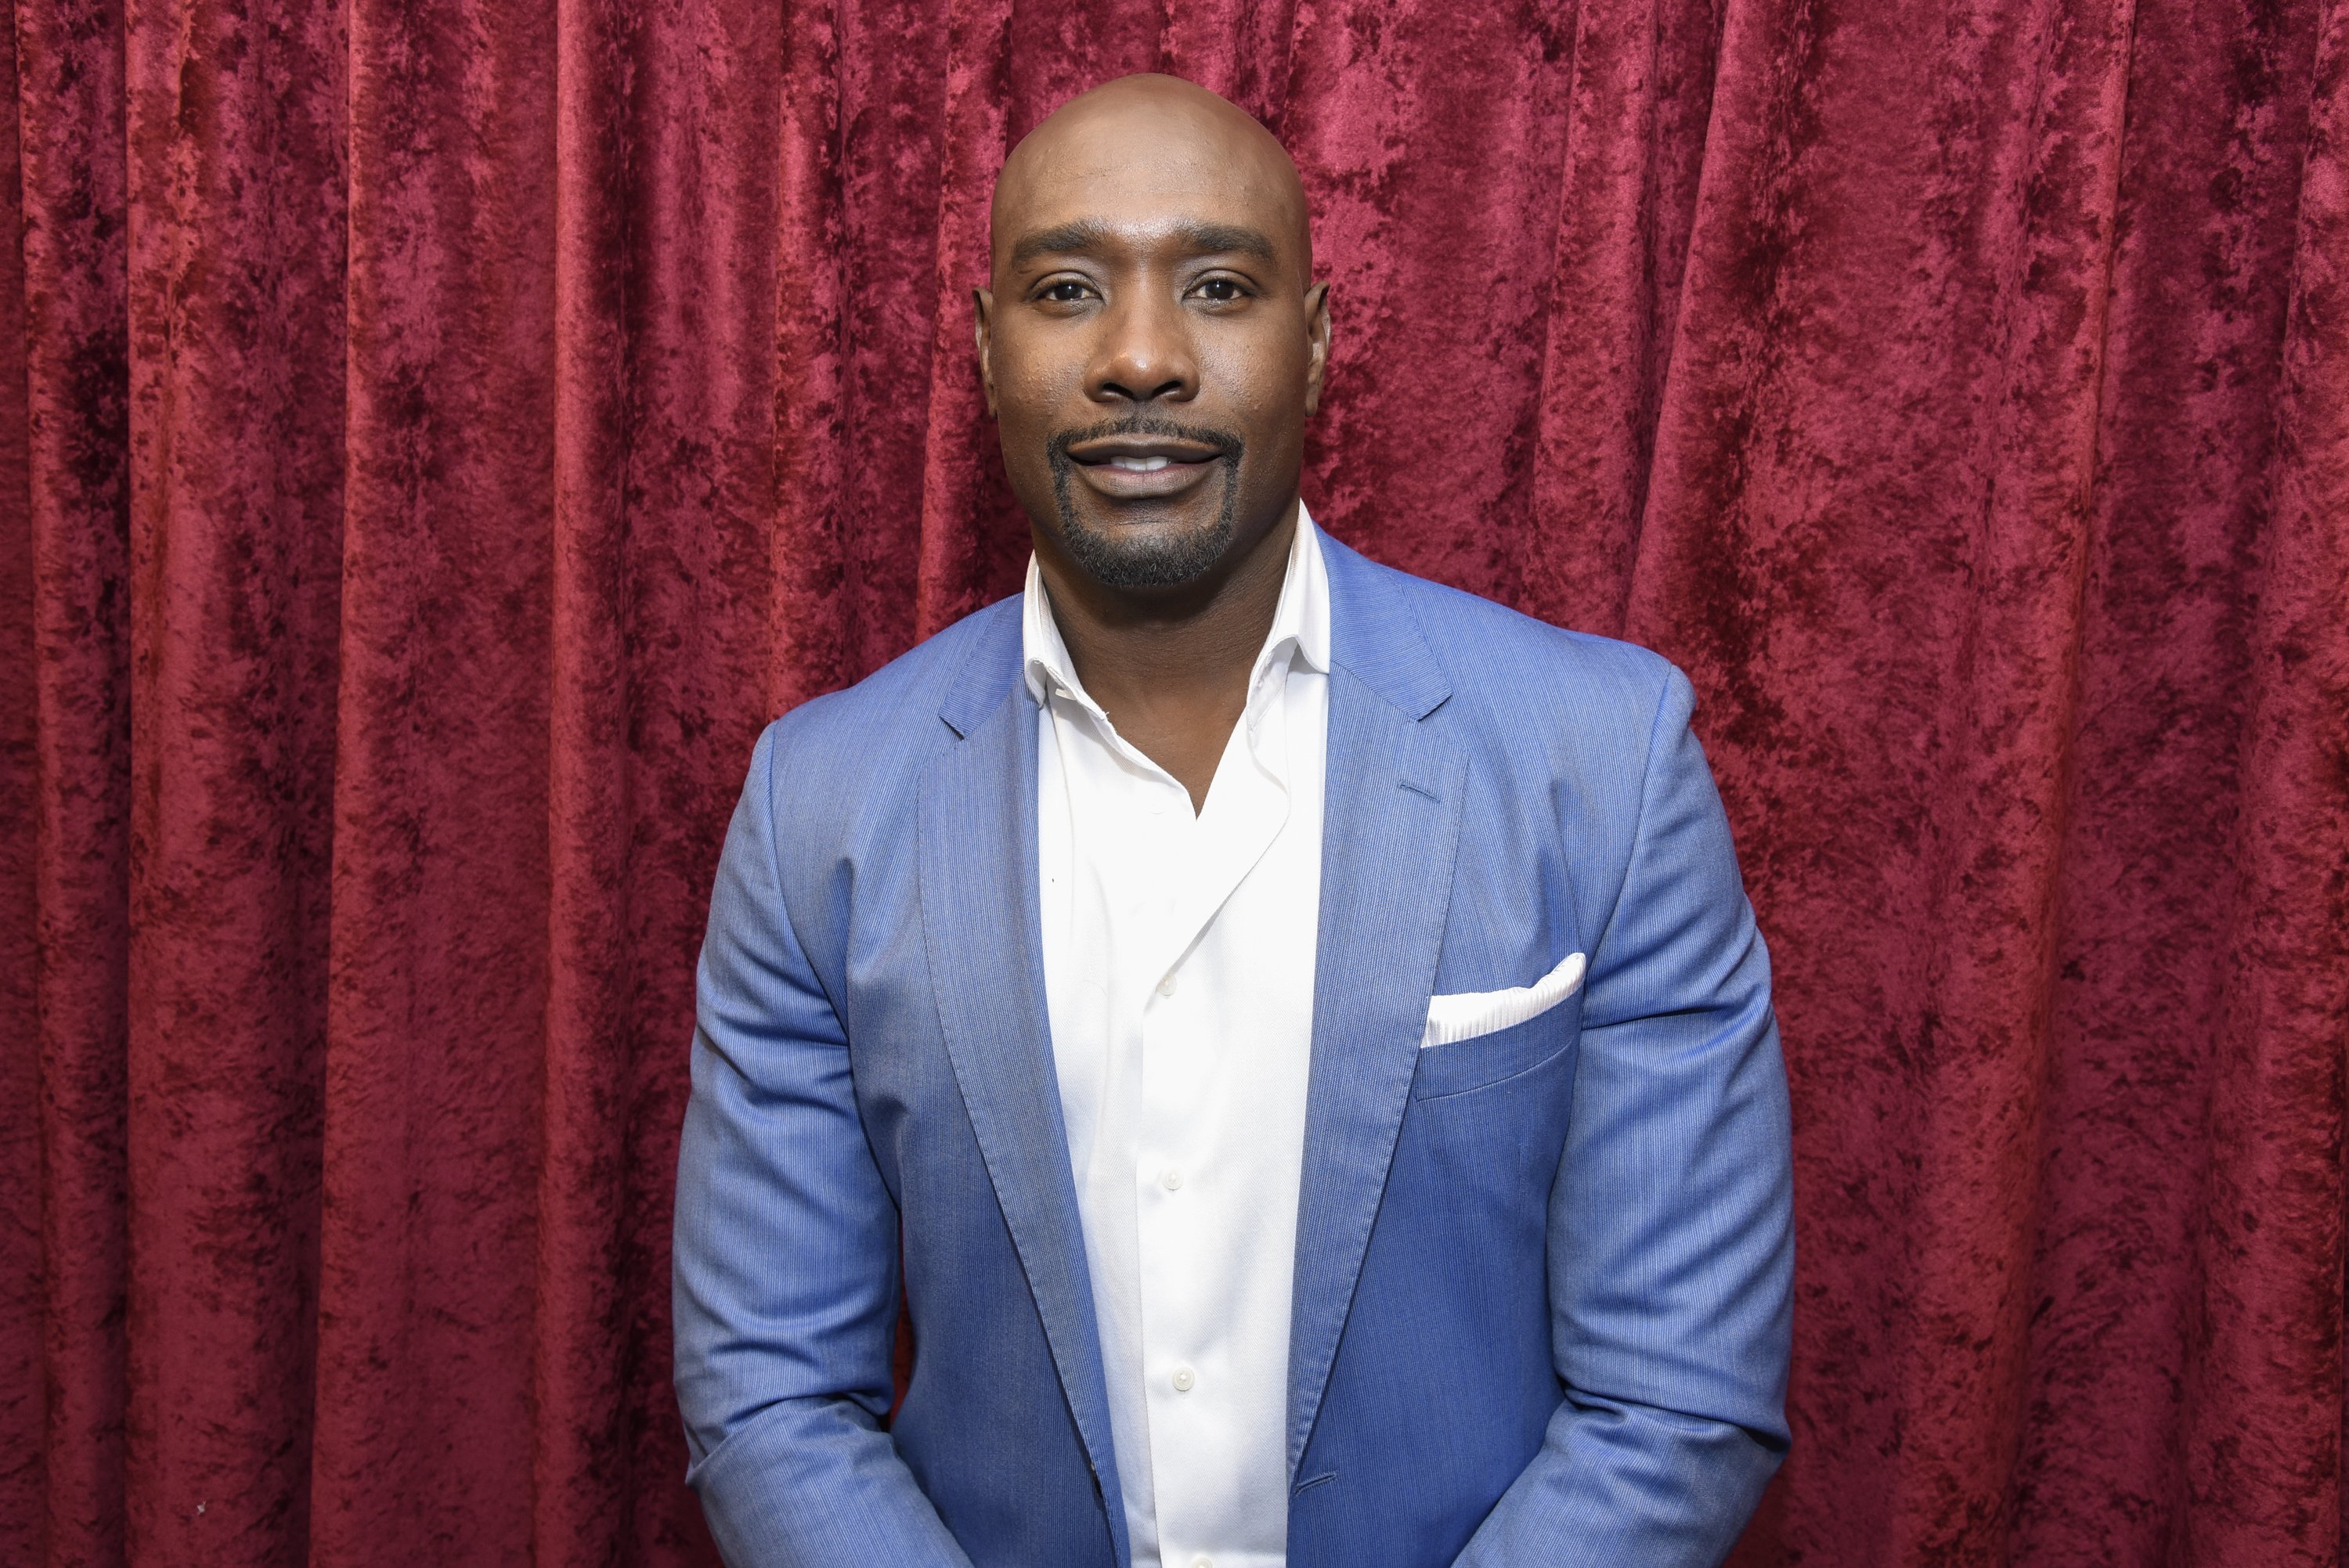 Morris Chestnut visits SiriusXM Studio on Sept. 7, 2016 in New York City | Photo: Getty Images